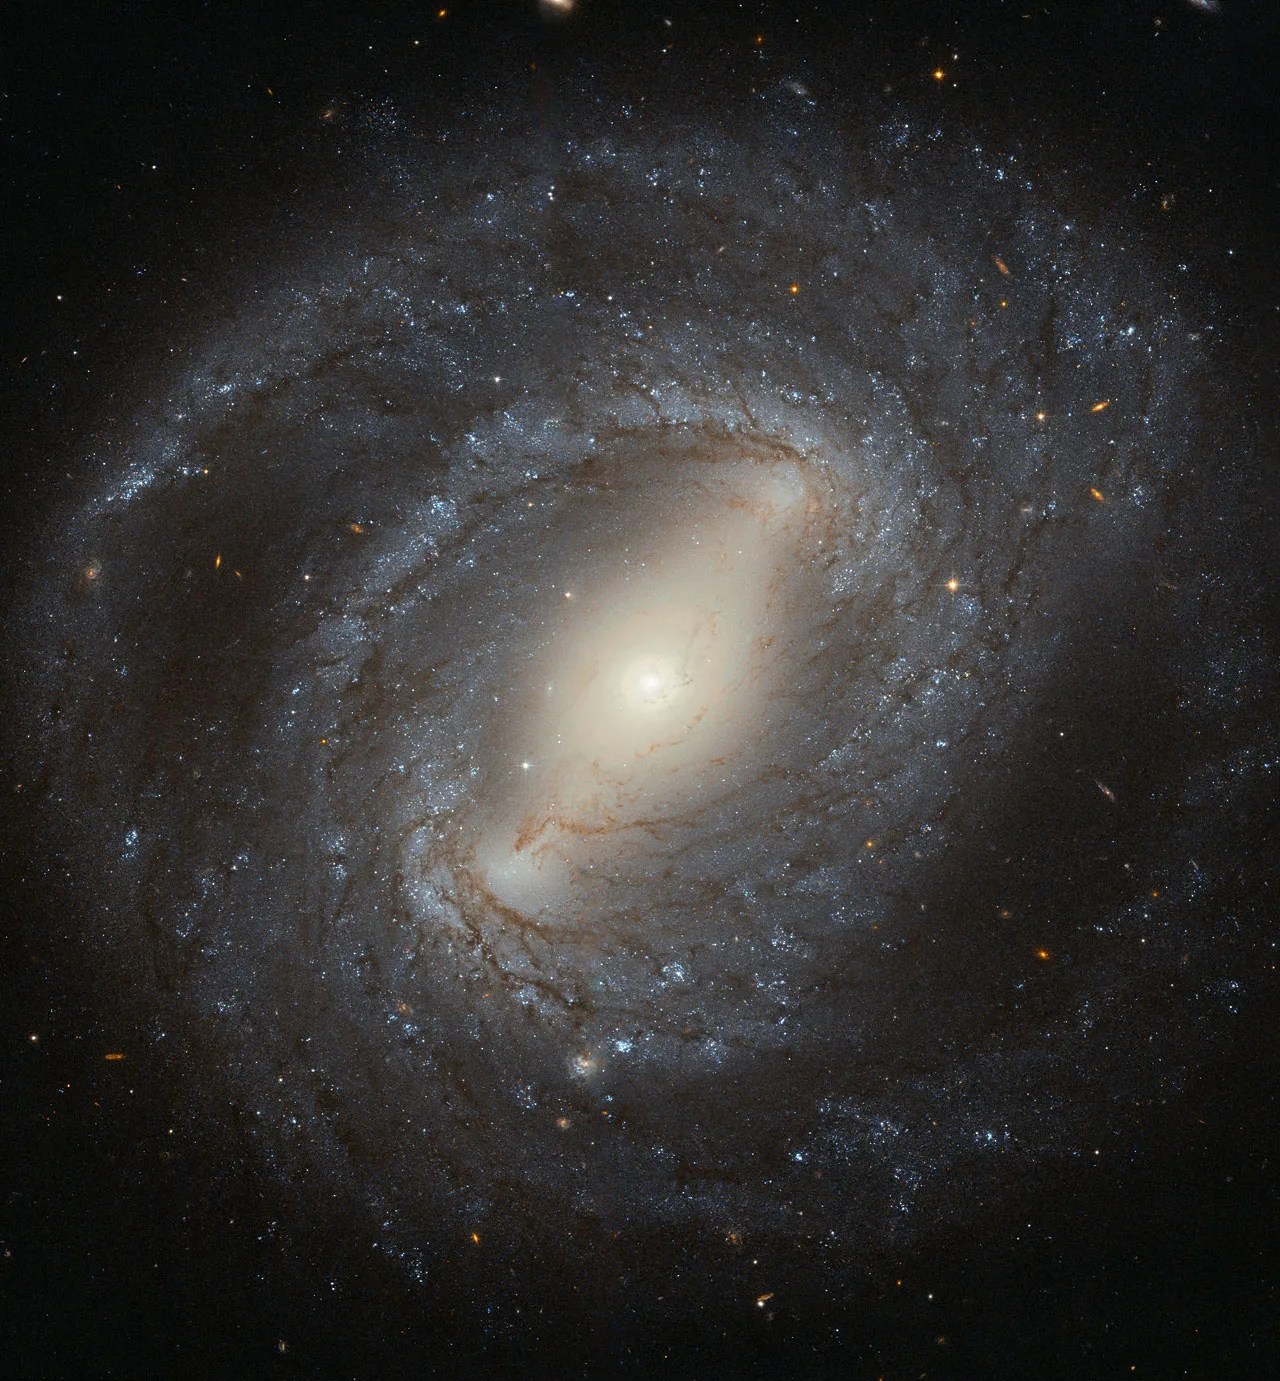 NGC 4394 is the archetypal barred spiral galaxy with spiral arms emerging from the ends of a bar that cuts through the galaxy.